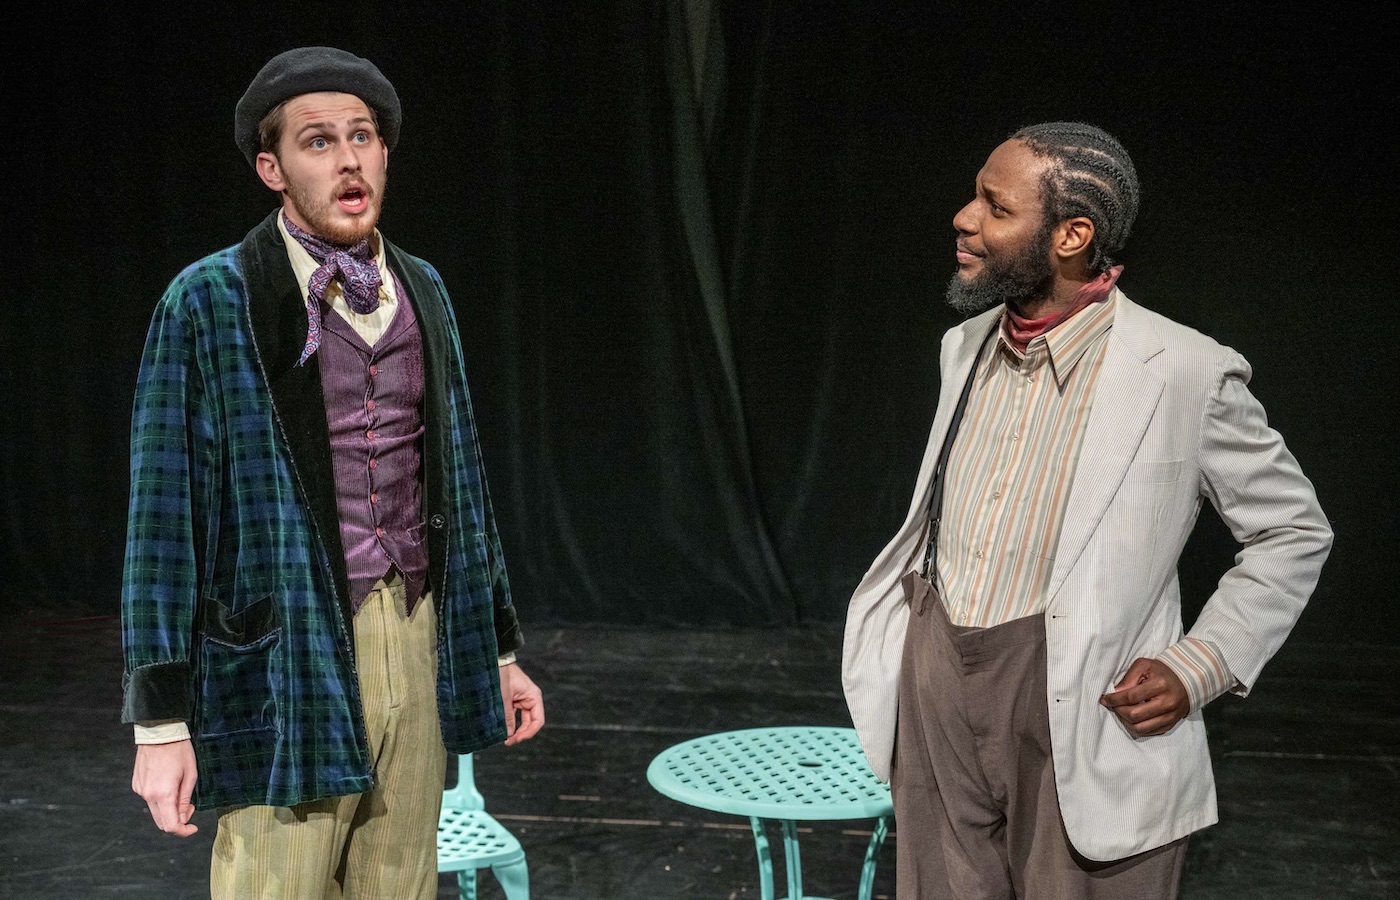 Christian Tuffy and Samir Brown in Act 1’s production of “Twelfth Night” 